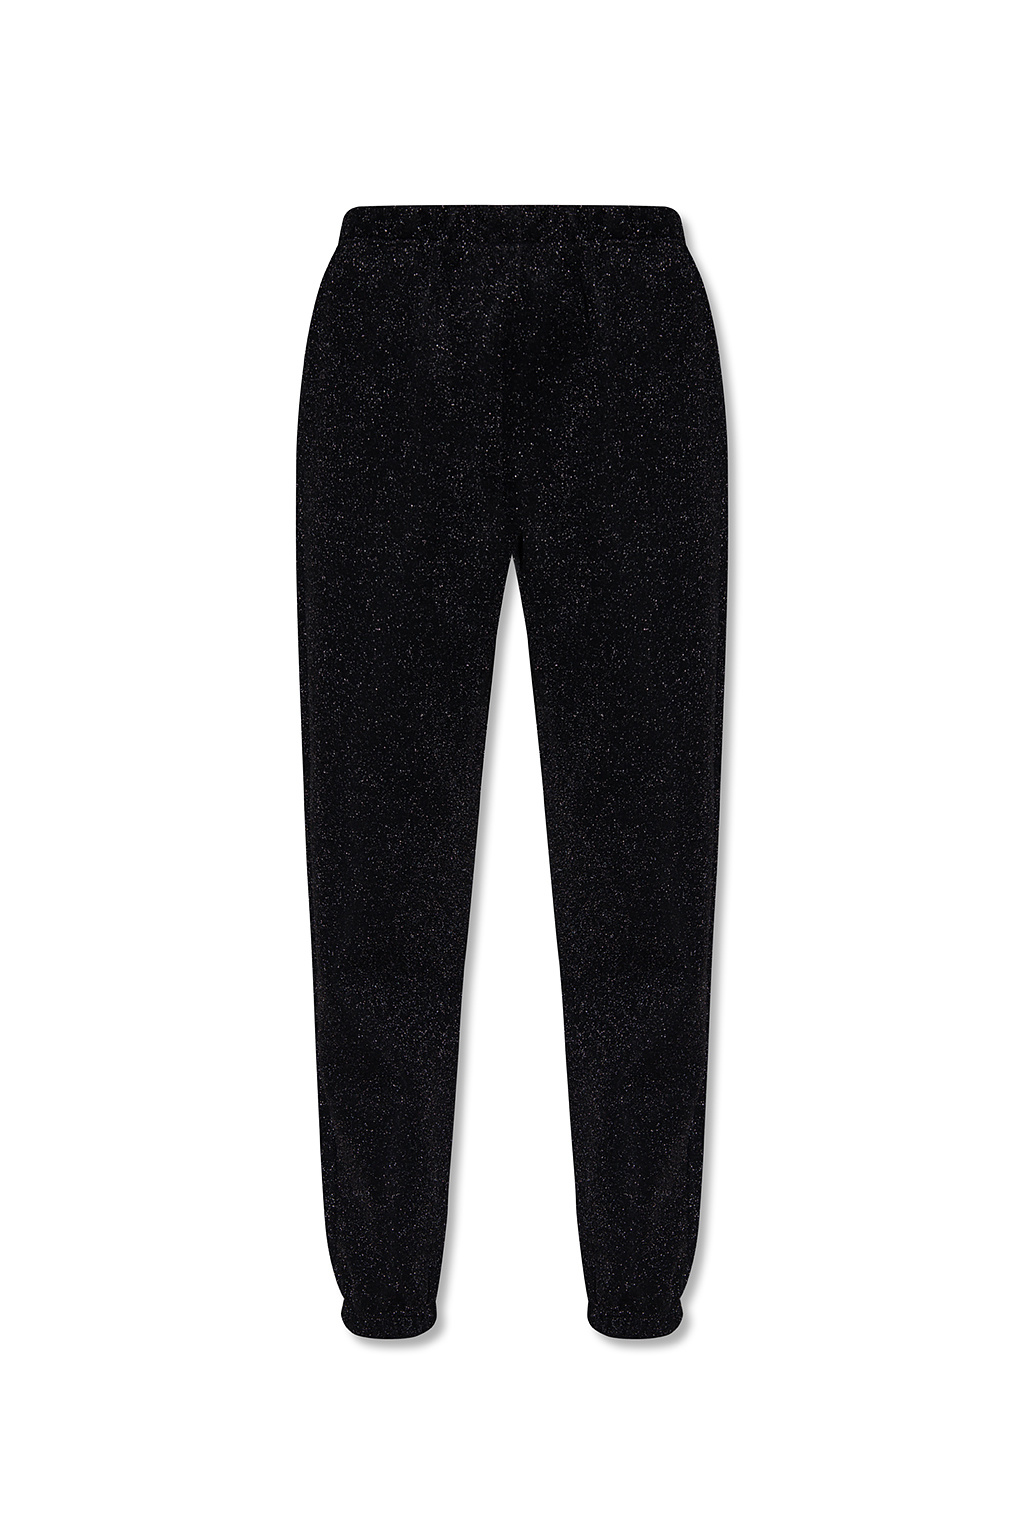 Oseree wide ribbed leggings